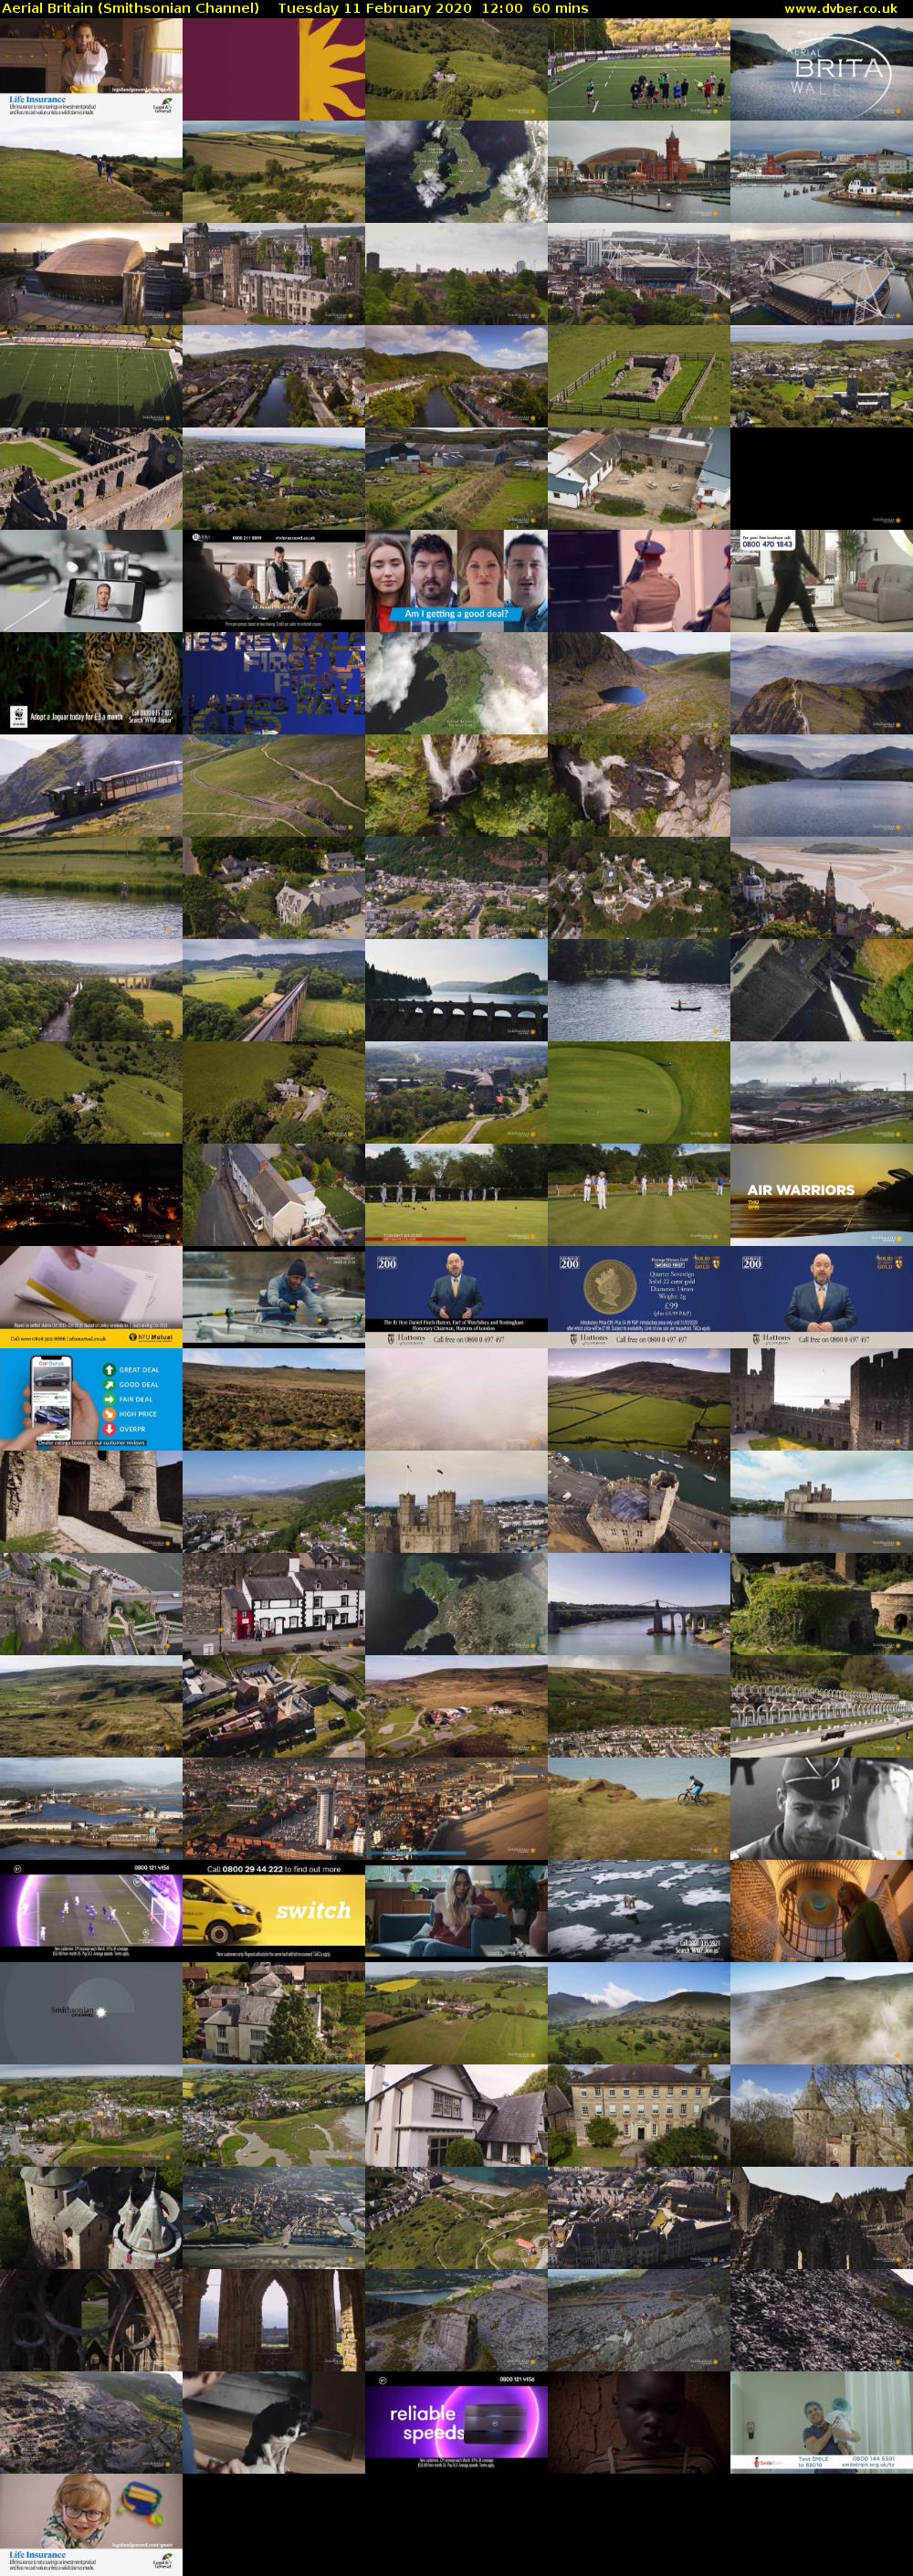 Aerial Britain (Smithsonian Channel) Tuesday 11 February 2020 12:00 - 13:00